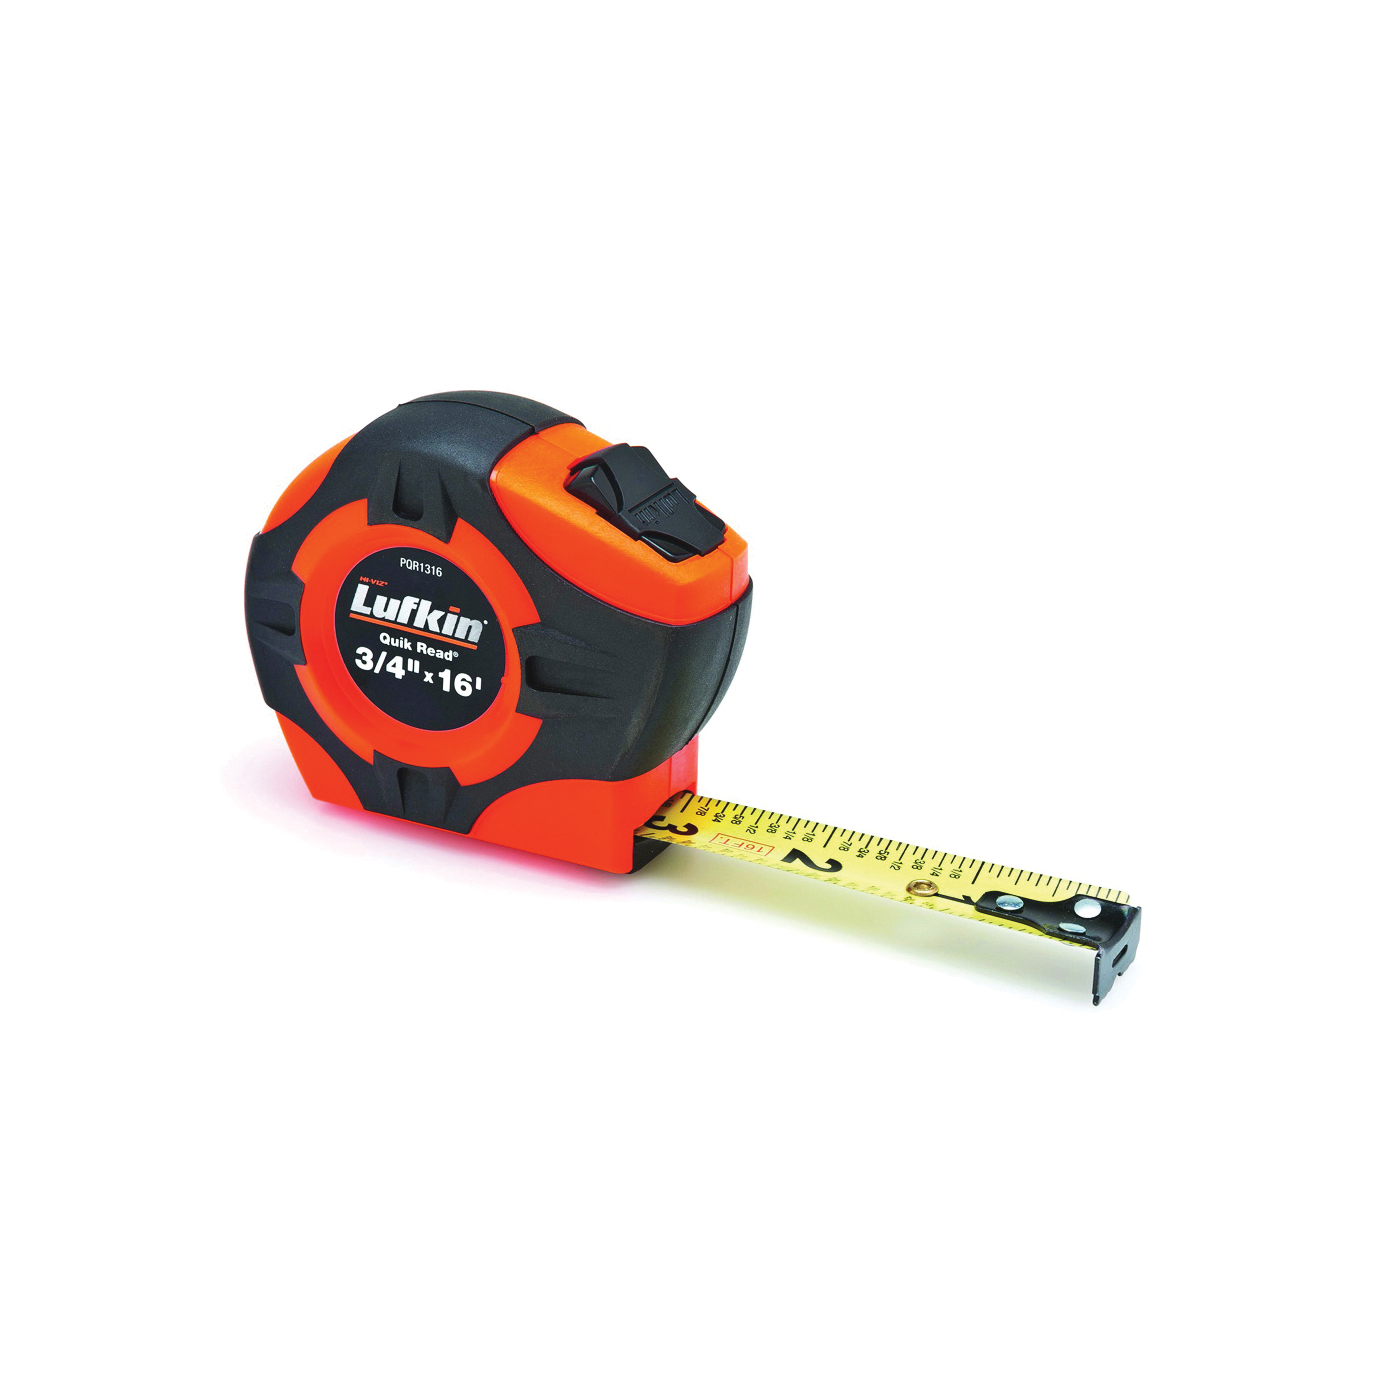 Quikread Series PQR1316N Tape Measure, 16 ft L Blade, 3/4 in W Blade, Steel Blade, ABS/Rubber Case